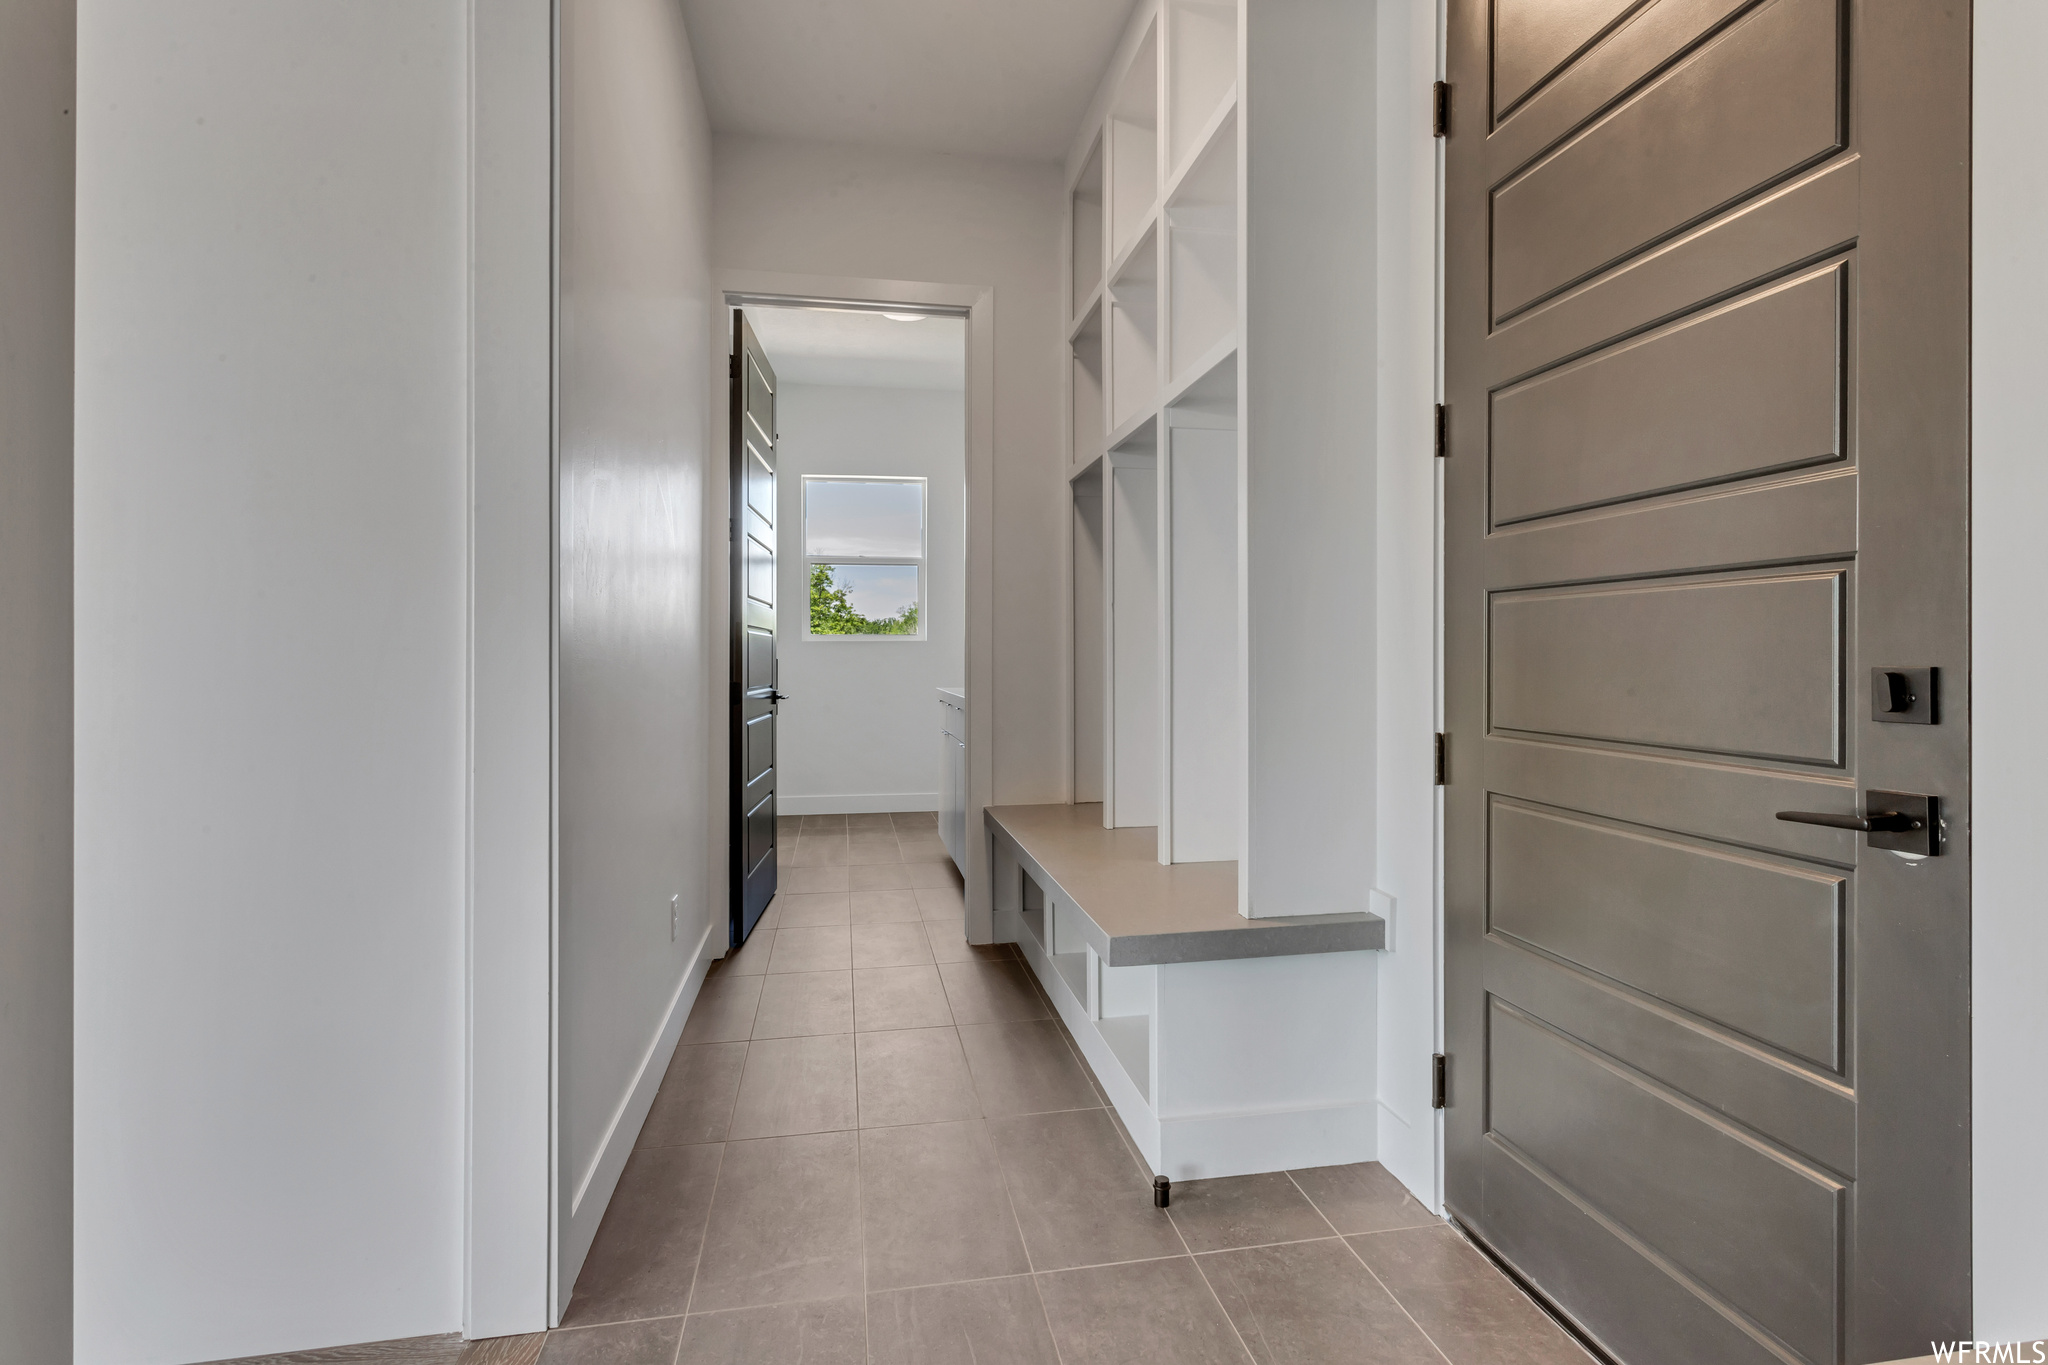 Hallway near garage entrance features a hard surface topped bench